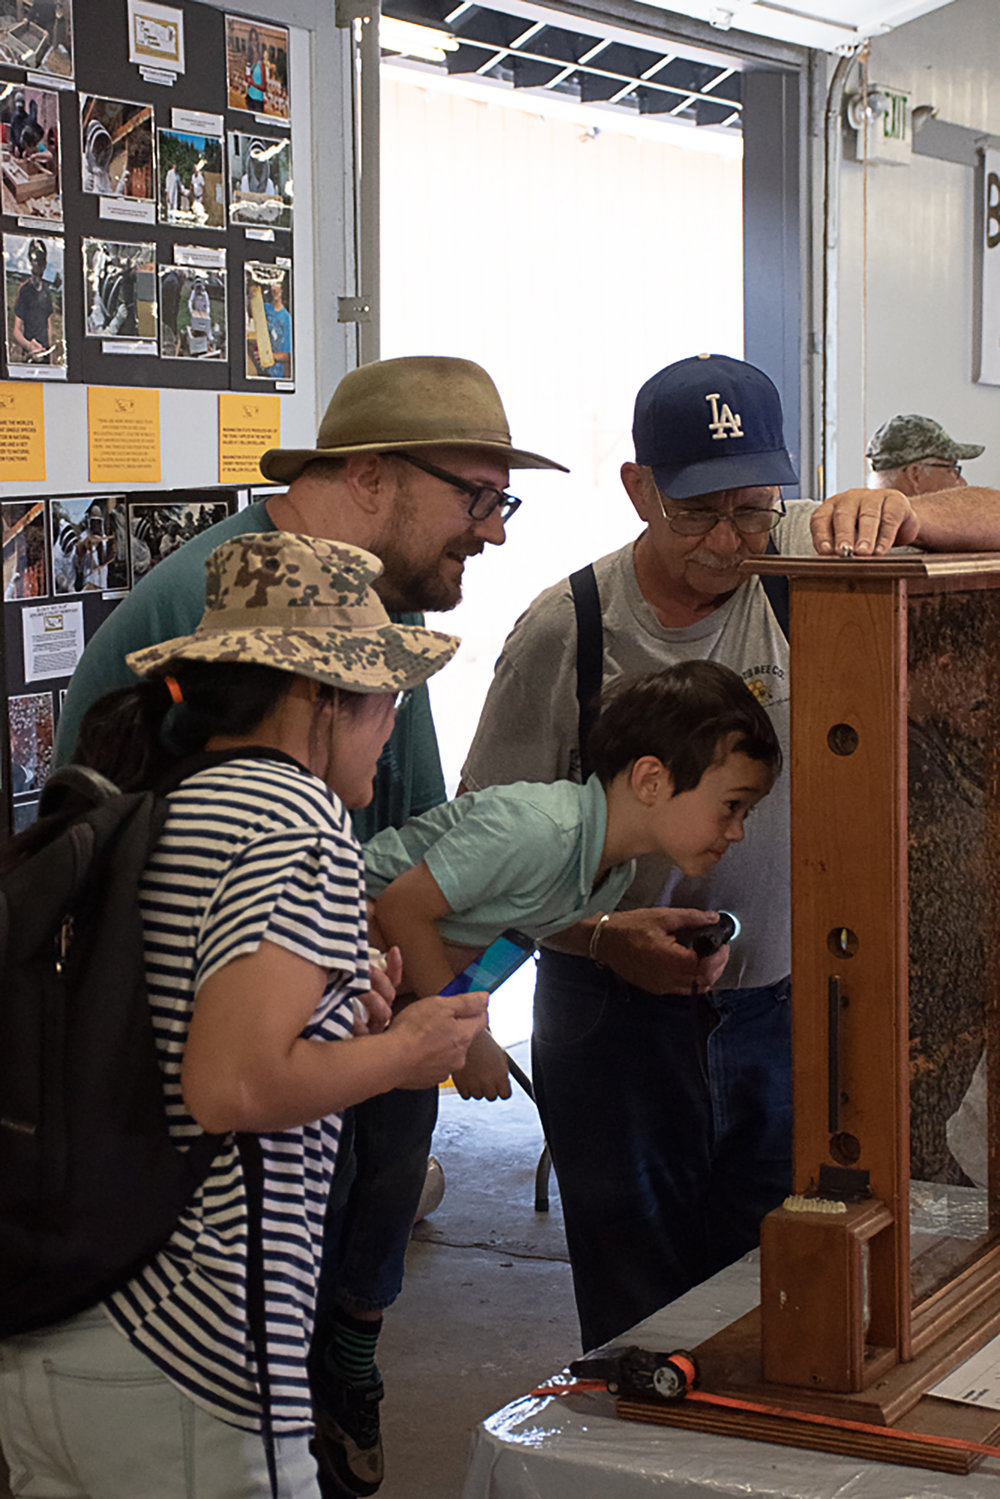 Bret Bryan (LA hat), a beekeeper and member of the Lewis County Beekeepers Association, helps fair-goers local the queen in the live beehive exhibit at their stand. Photo by Owen Sexton.